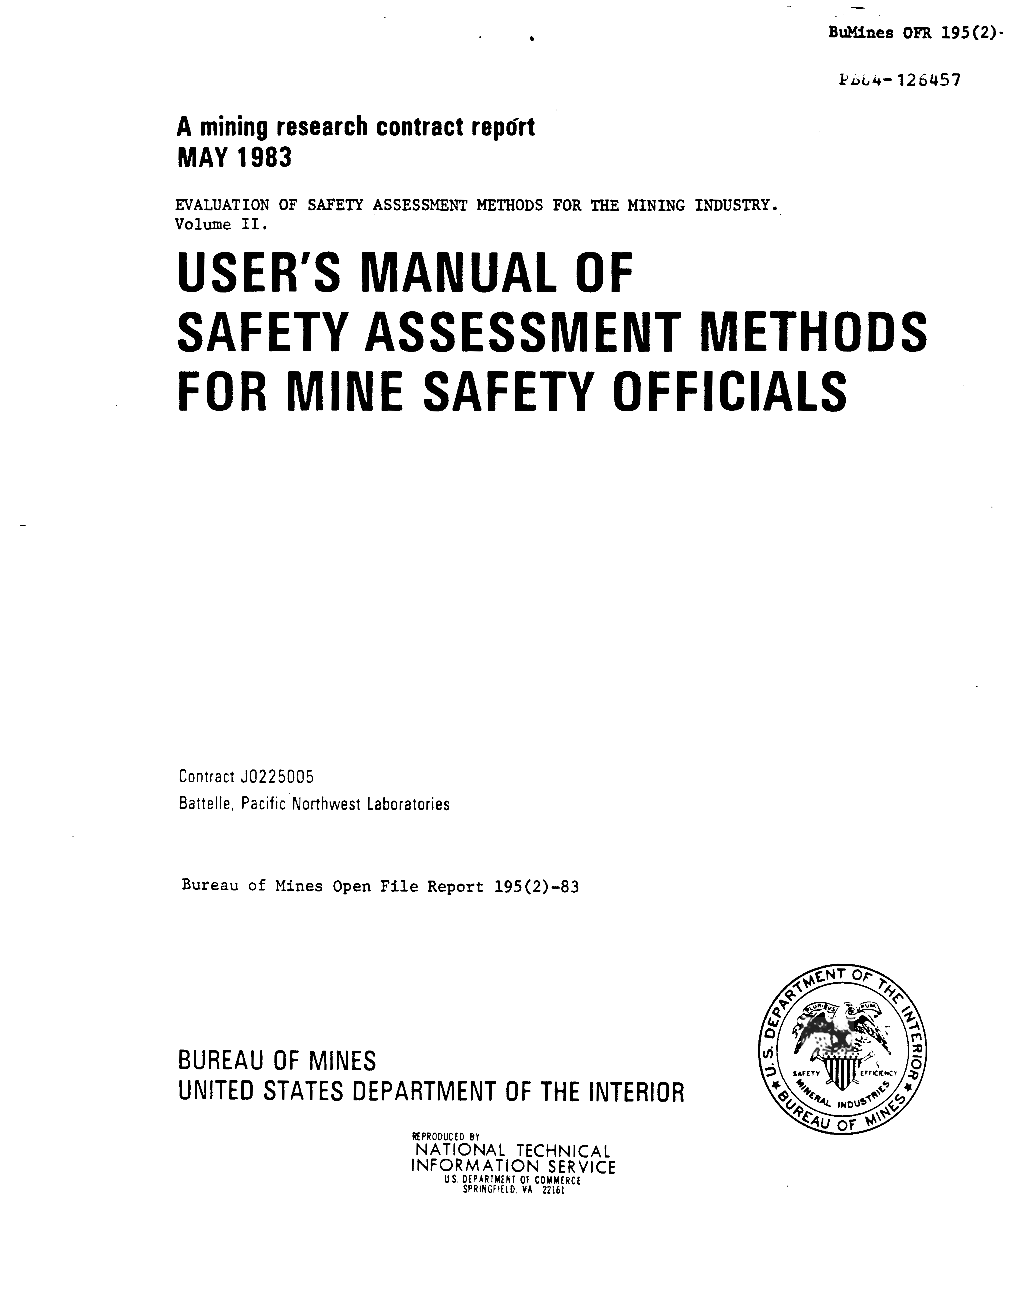 User's Manual of Safety Assessment Methods for Mine Safety Officials